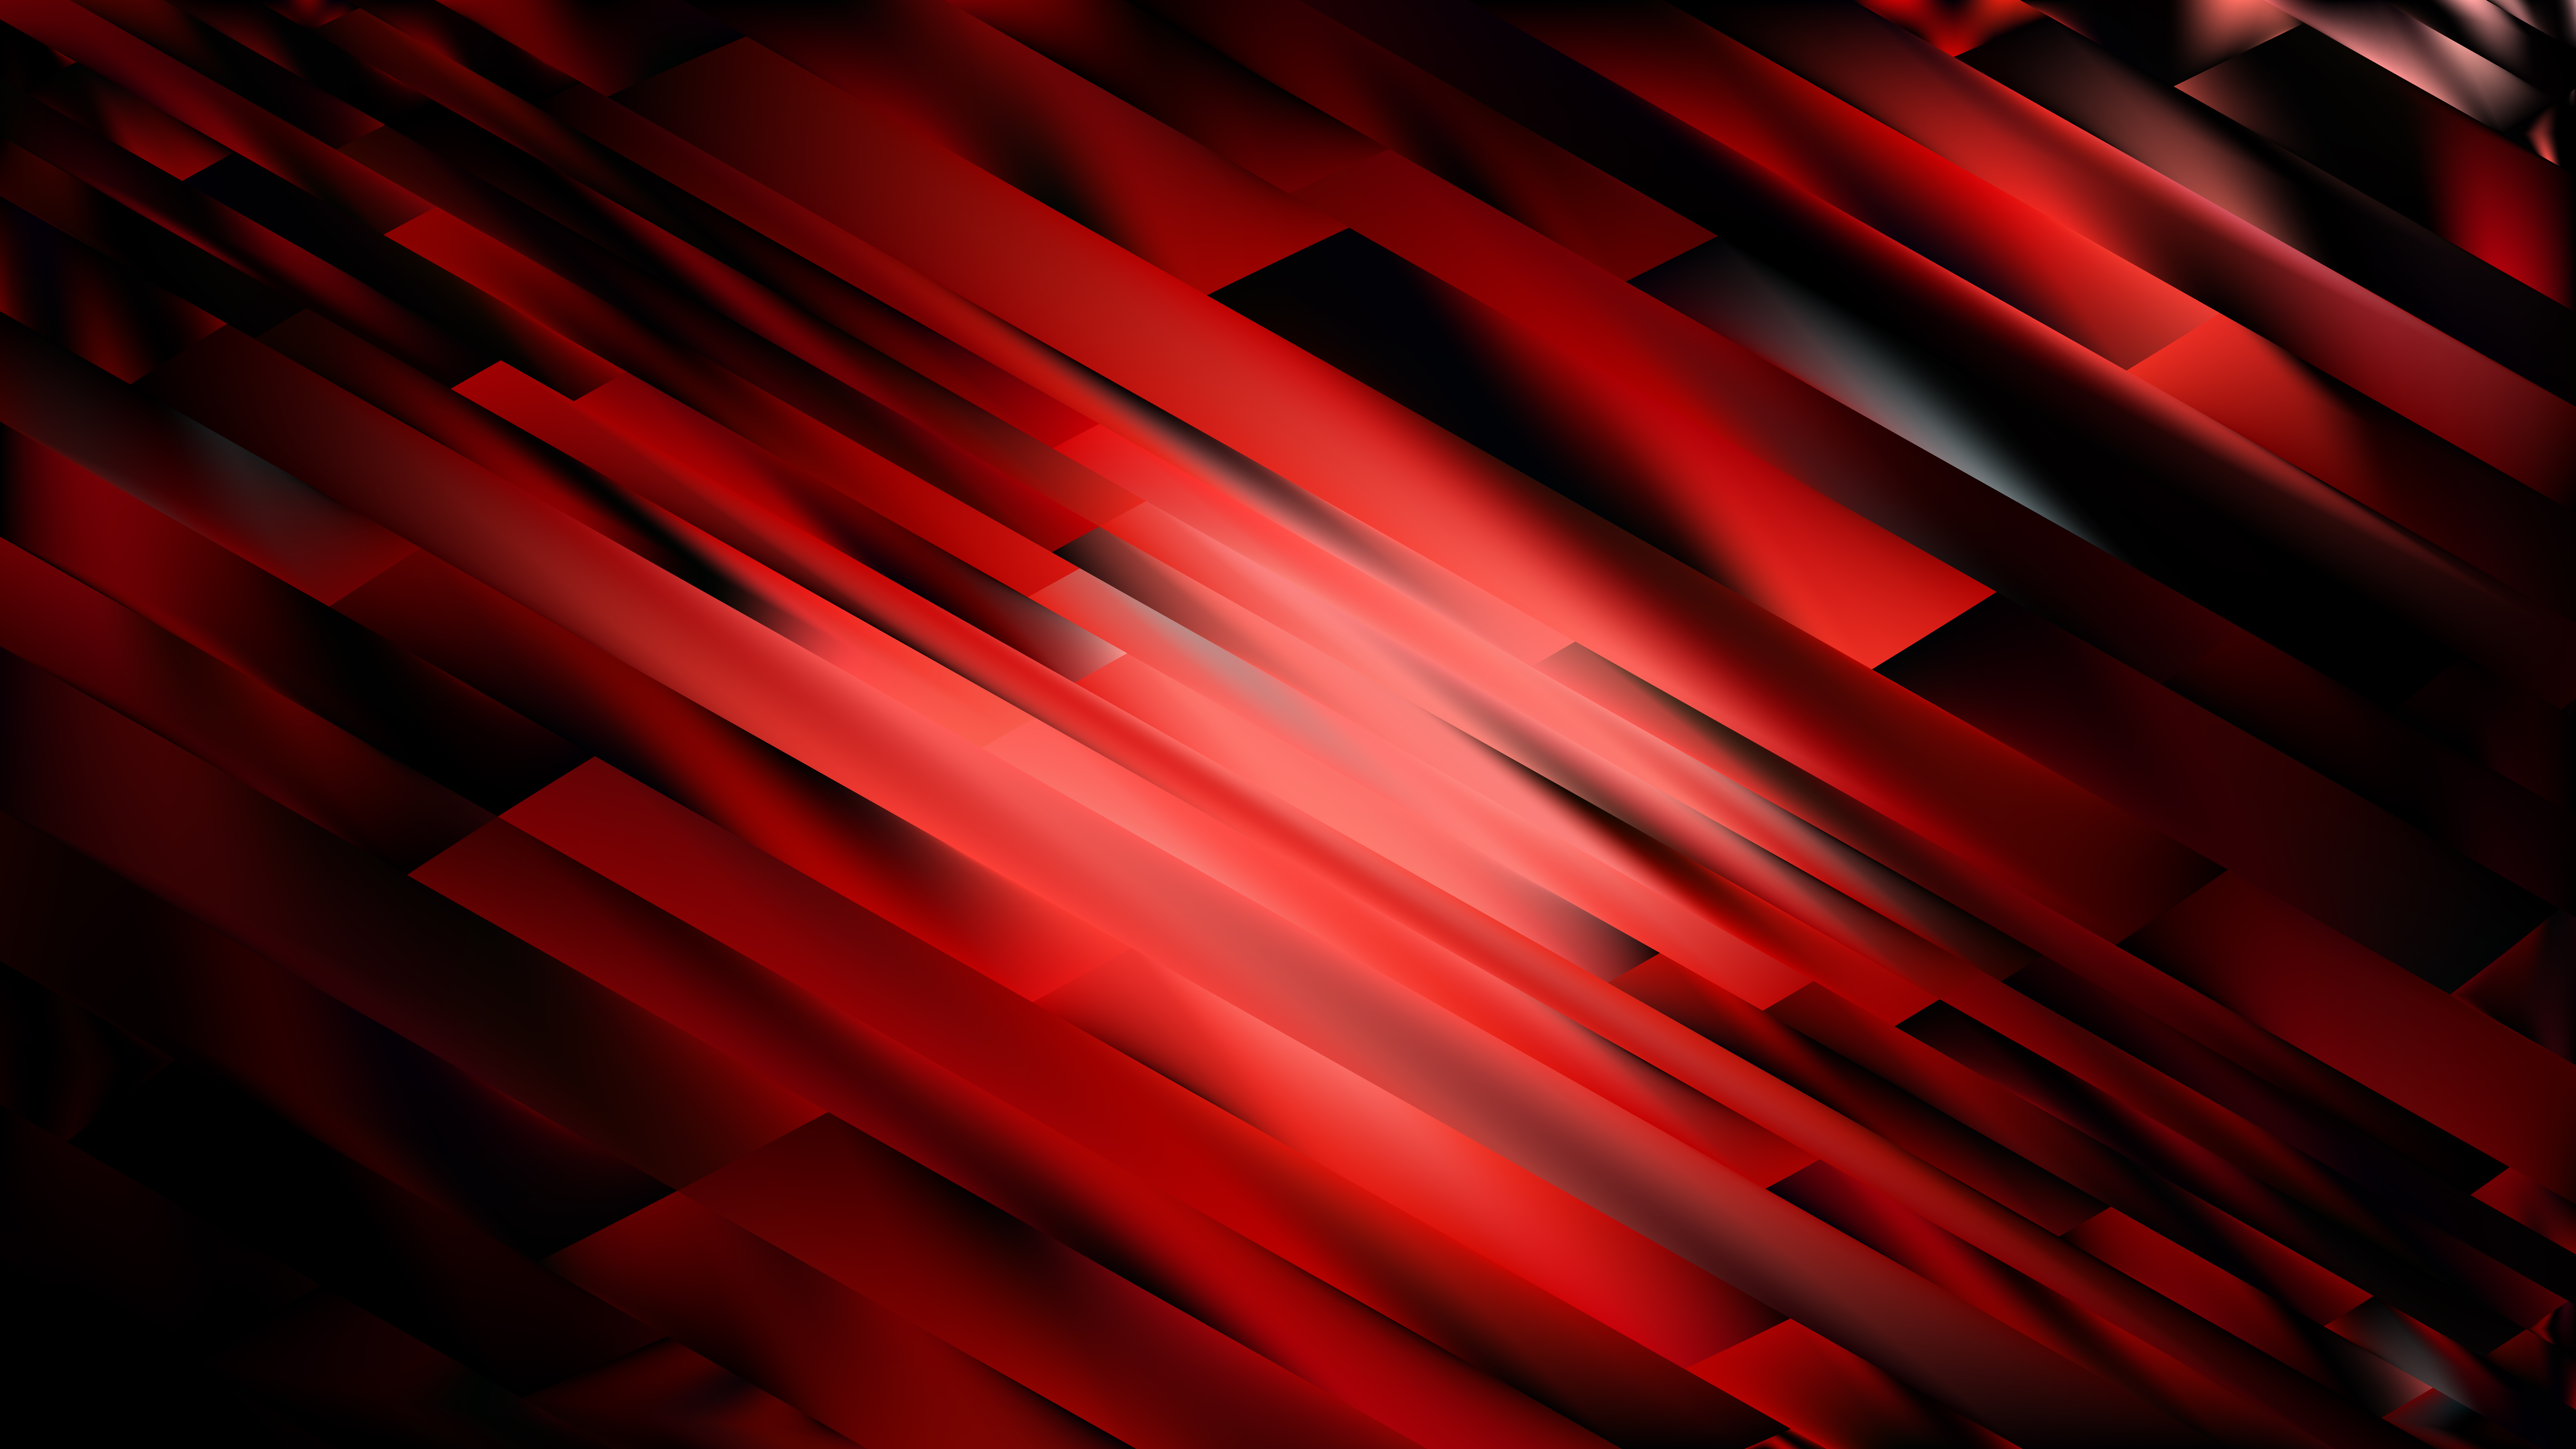 Free Abstract Cool Red Background Vector Illustration